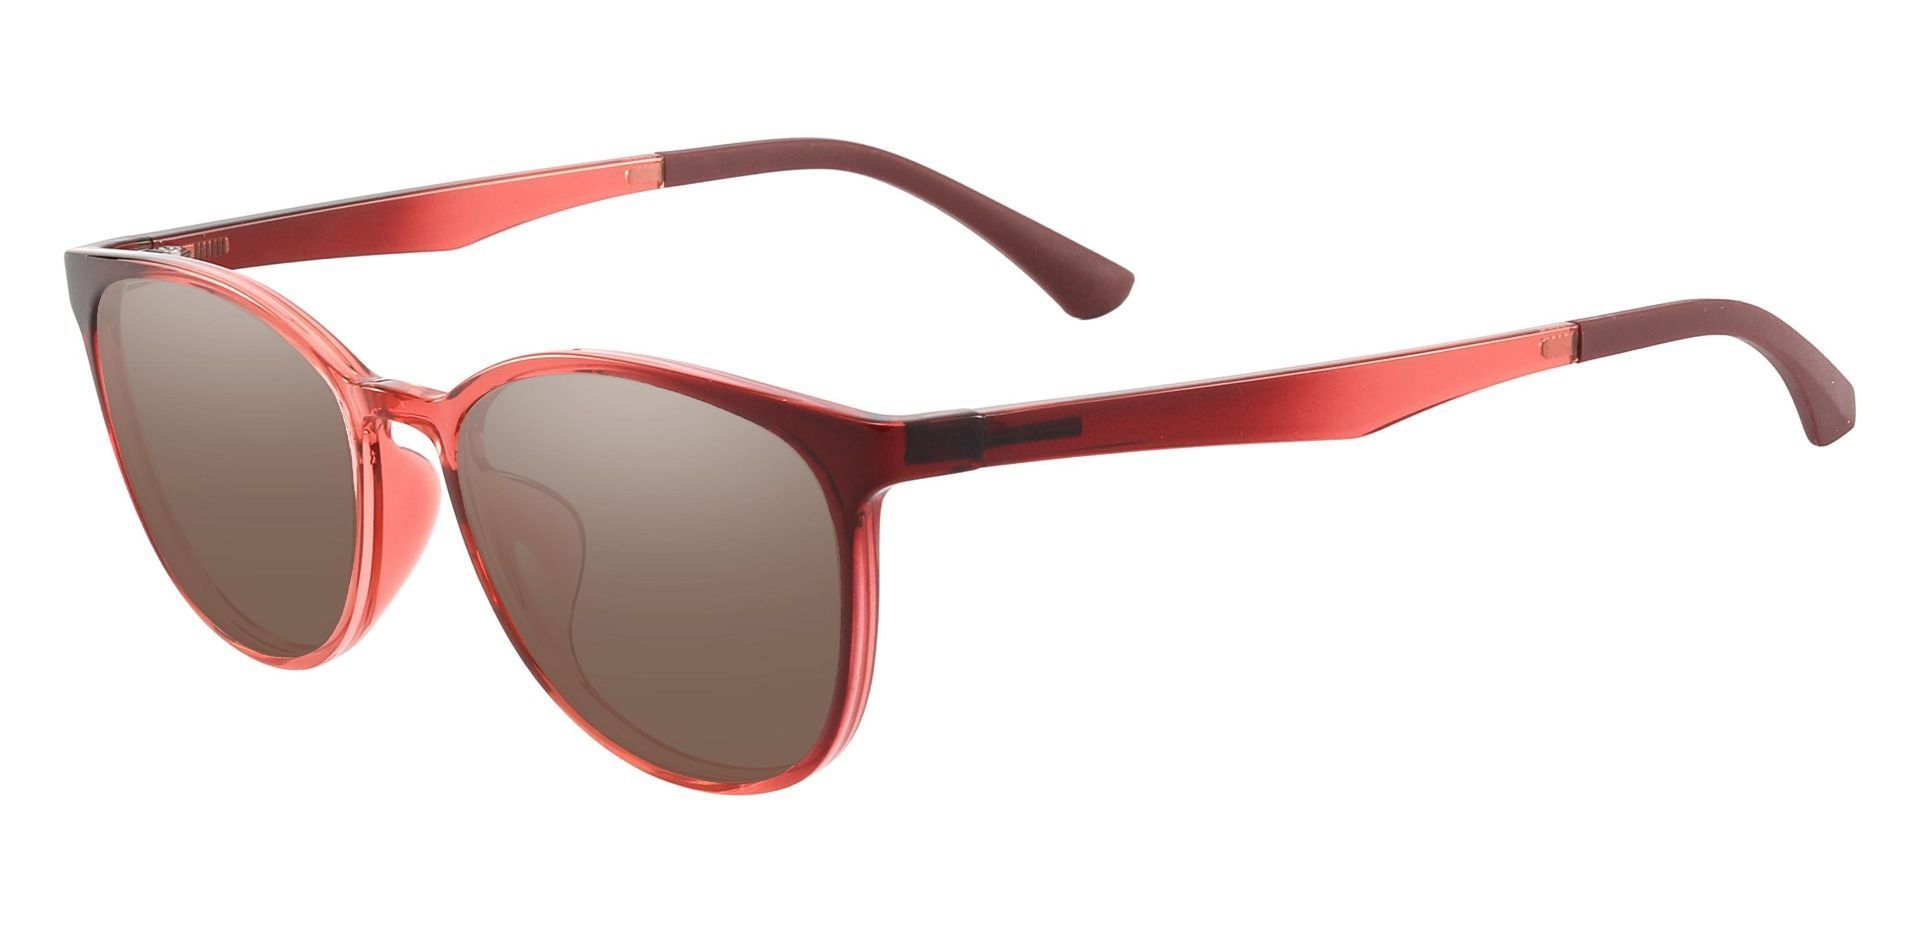 Pembroke Oval Non-Rx Sunglasses - Pink Frame With Brown Lenses